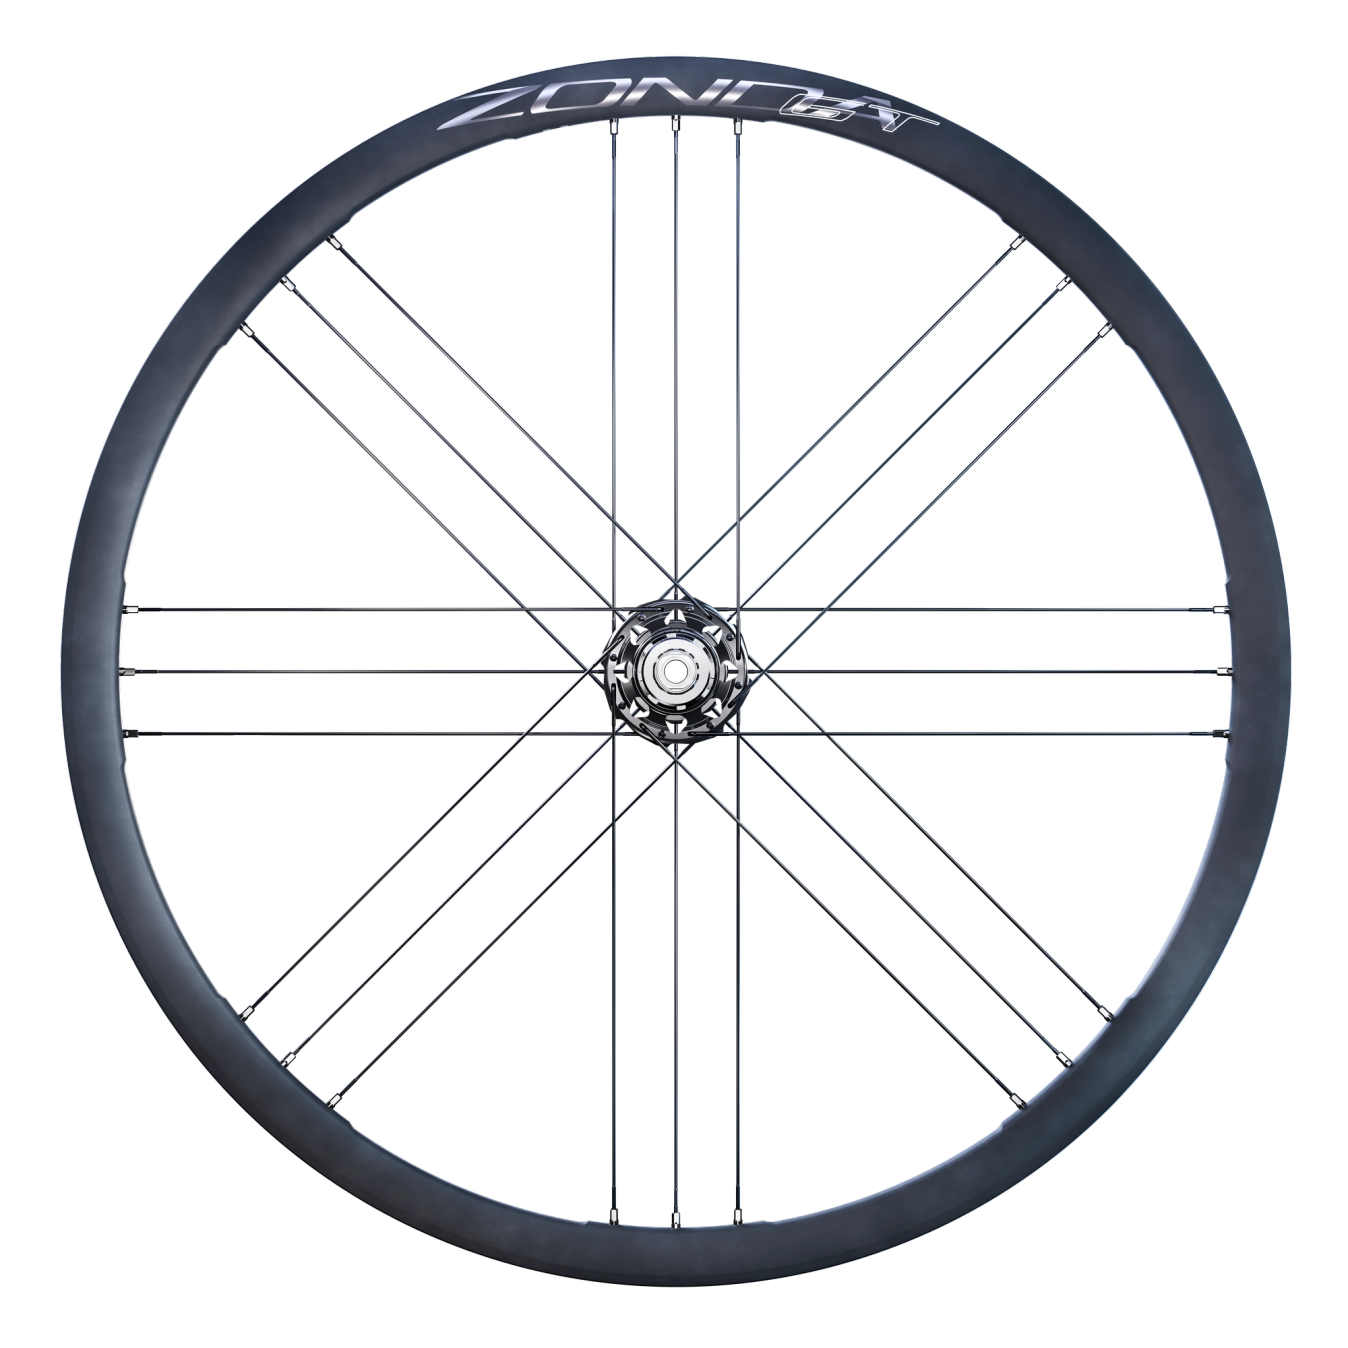 New Zonda wheels feature an up to date 23mm internal rim width with Campagnolo's easily recognisable G3 spoke lacing